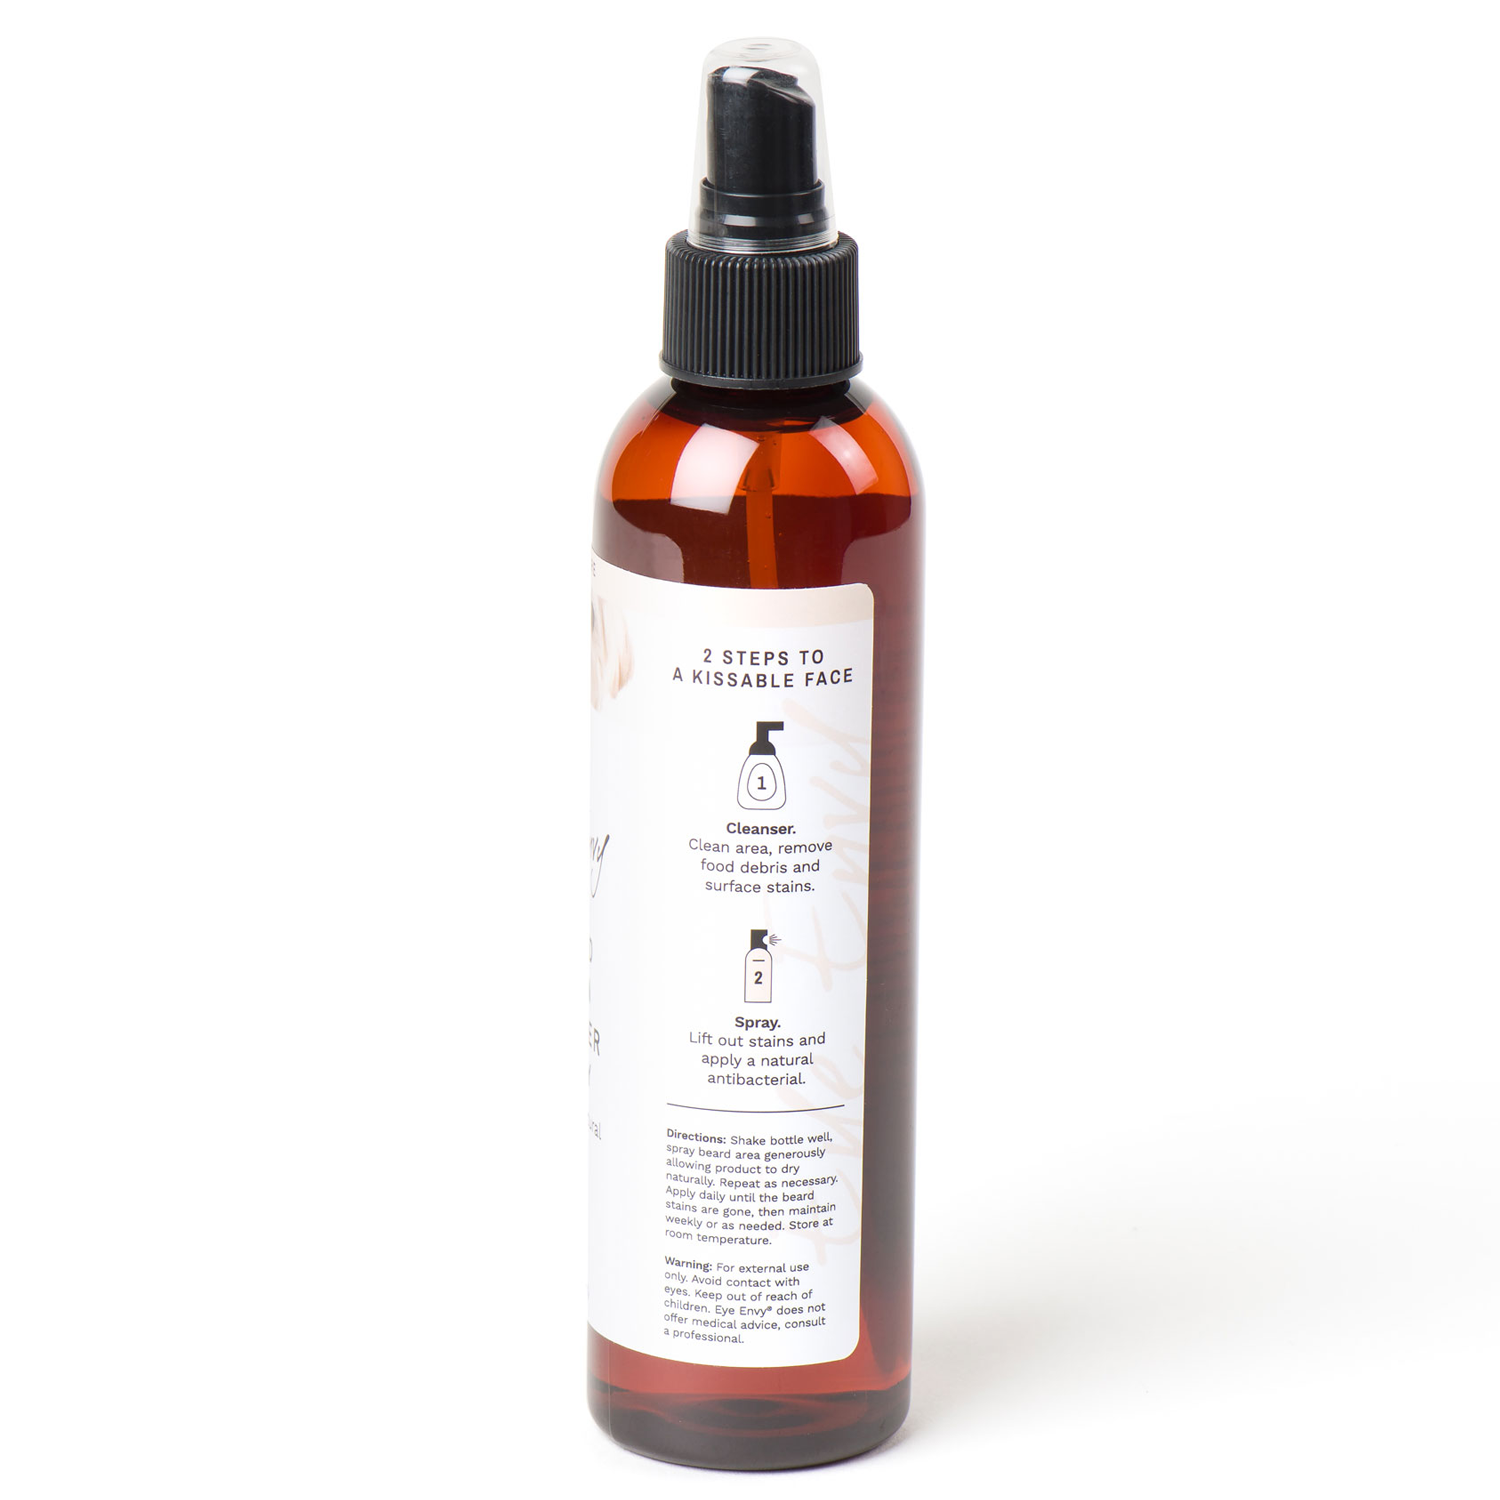 Pet Boutique - Dog Grooming - Eye Envy - Beard Stain Remover Spray